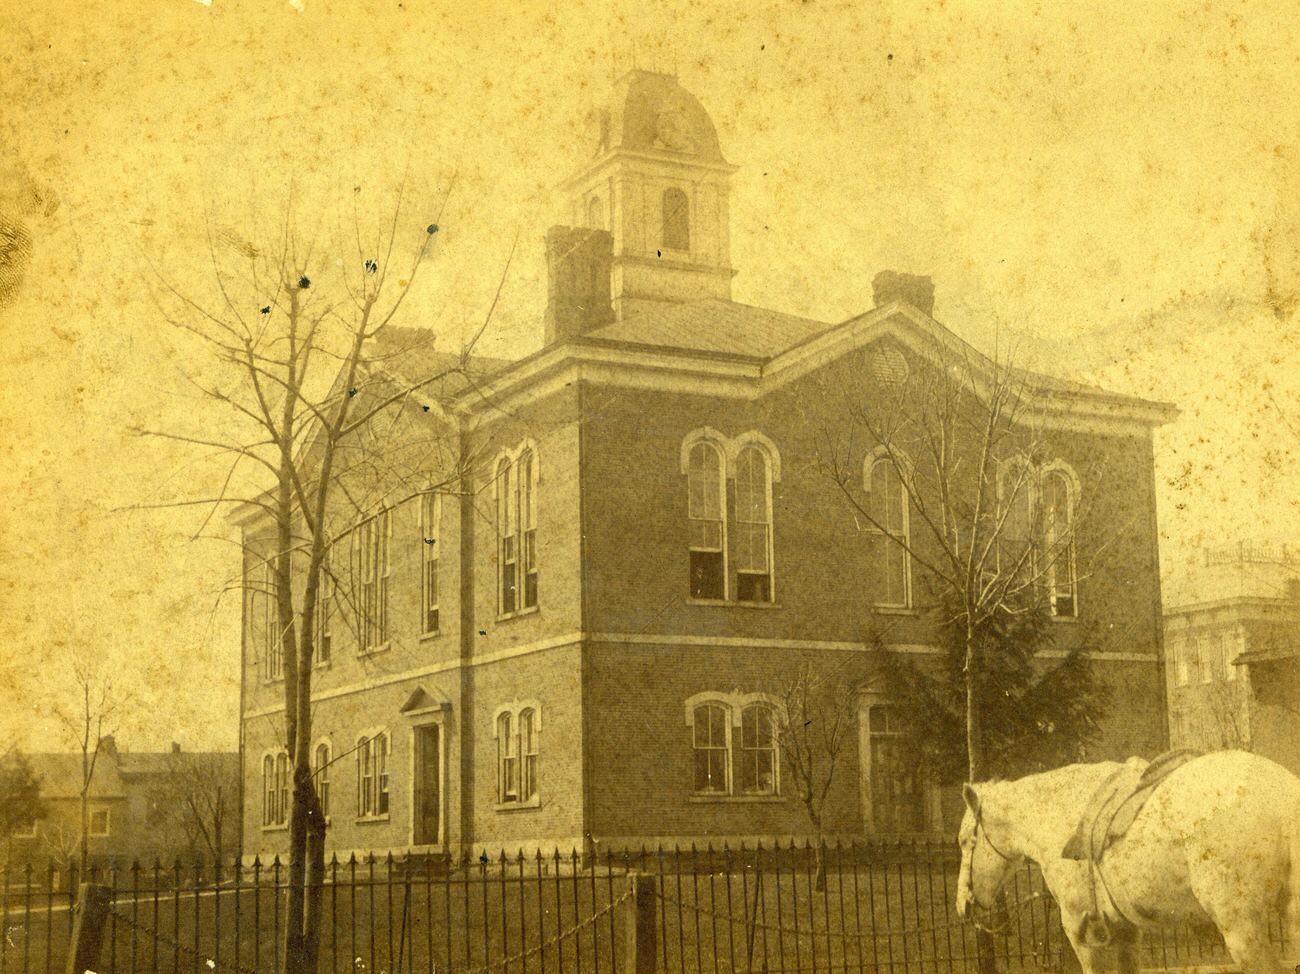 Adams County Courthouse with a horse in the foreground, 1890s